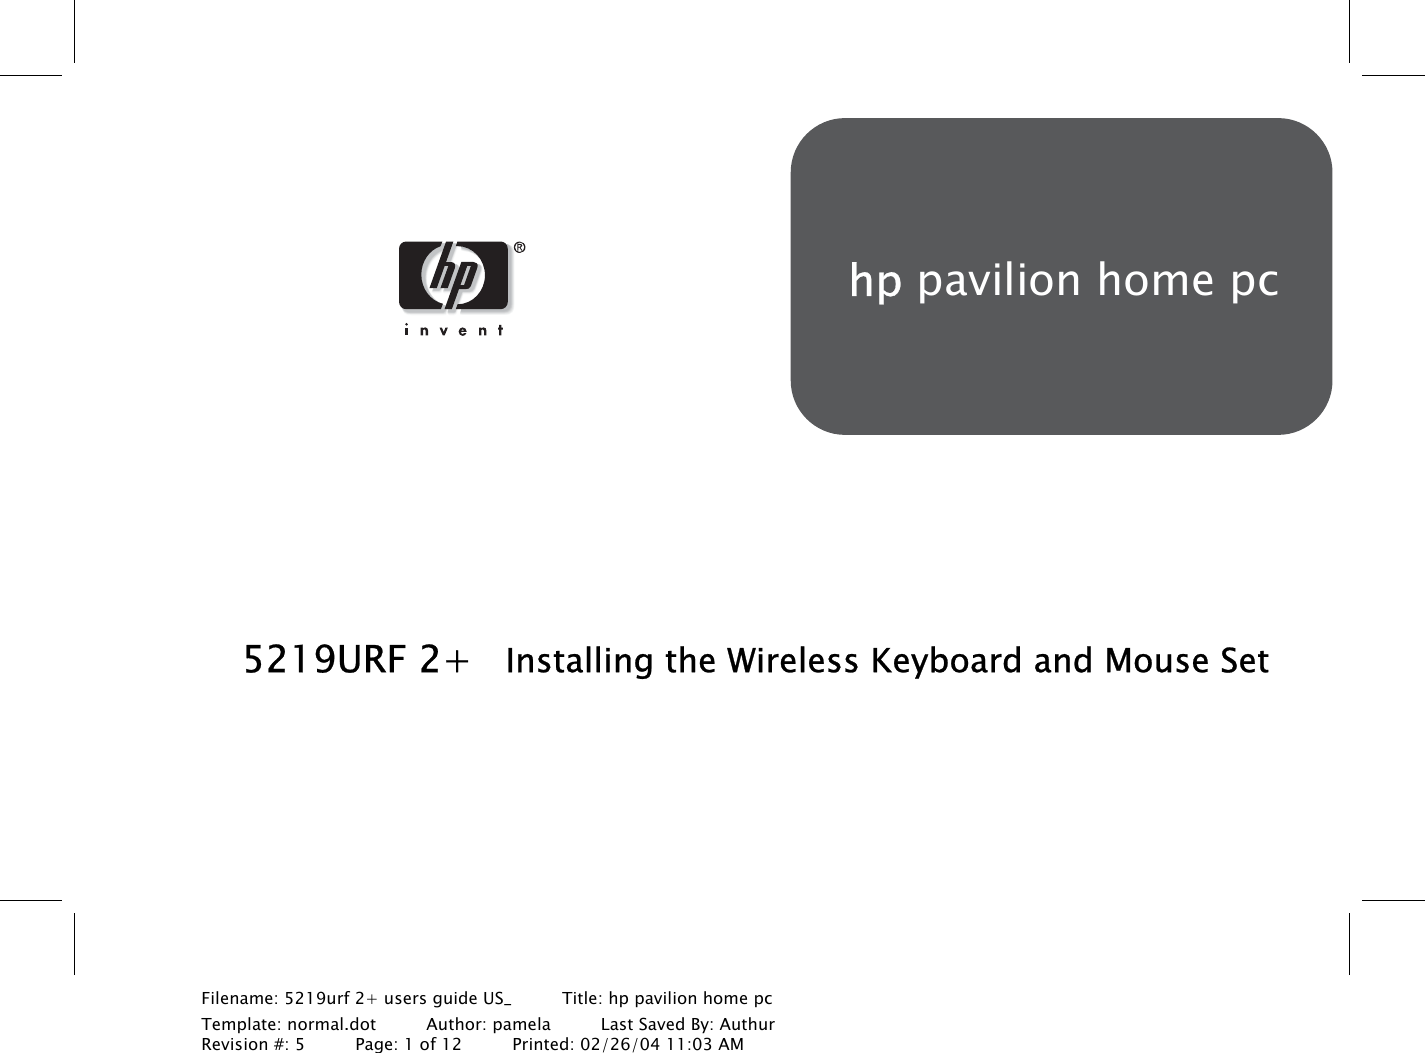 Filename: 5219urf 2+ users guide US_       Title: hp pavilion home pcTemplate: normal.dot      Author: pamela      Last Saved By: AuthurRevision #: 5      Page: 1 of 12      Printed: 02/26/04 11:03 AMhp pavilion home pc5219URF 2+    Installing the Wireless Keyboard and Mouse Set